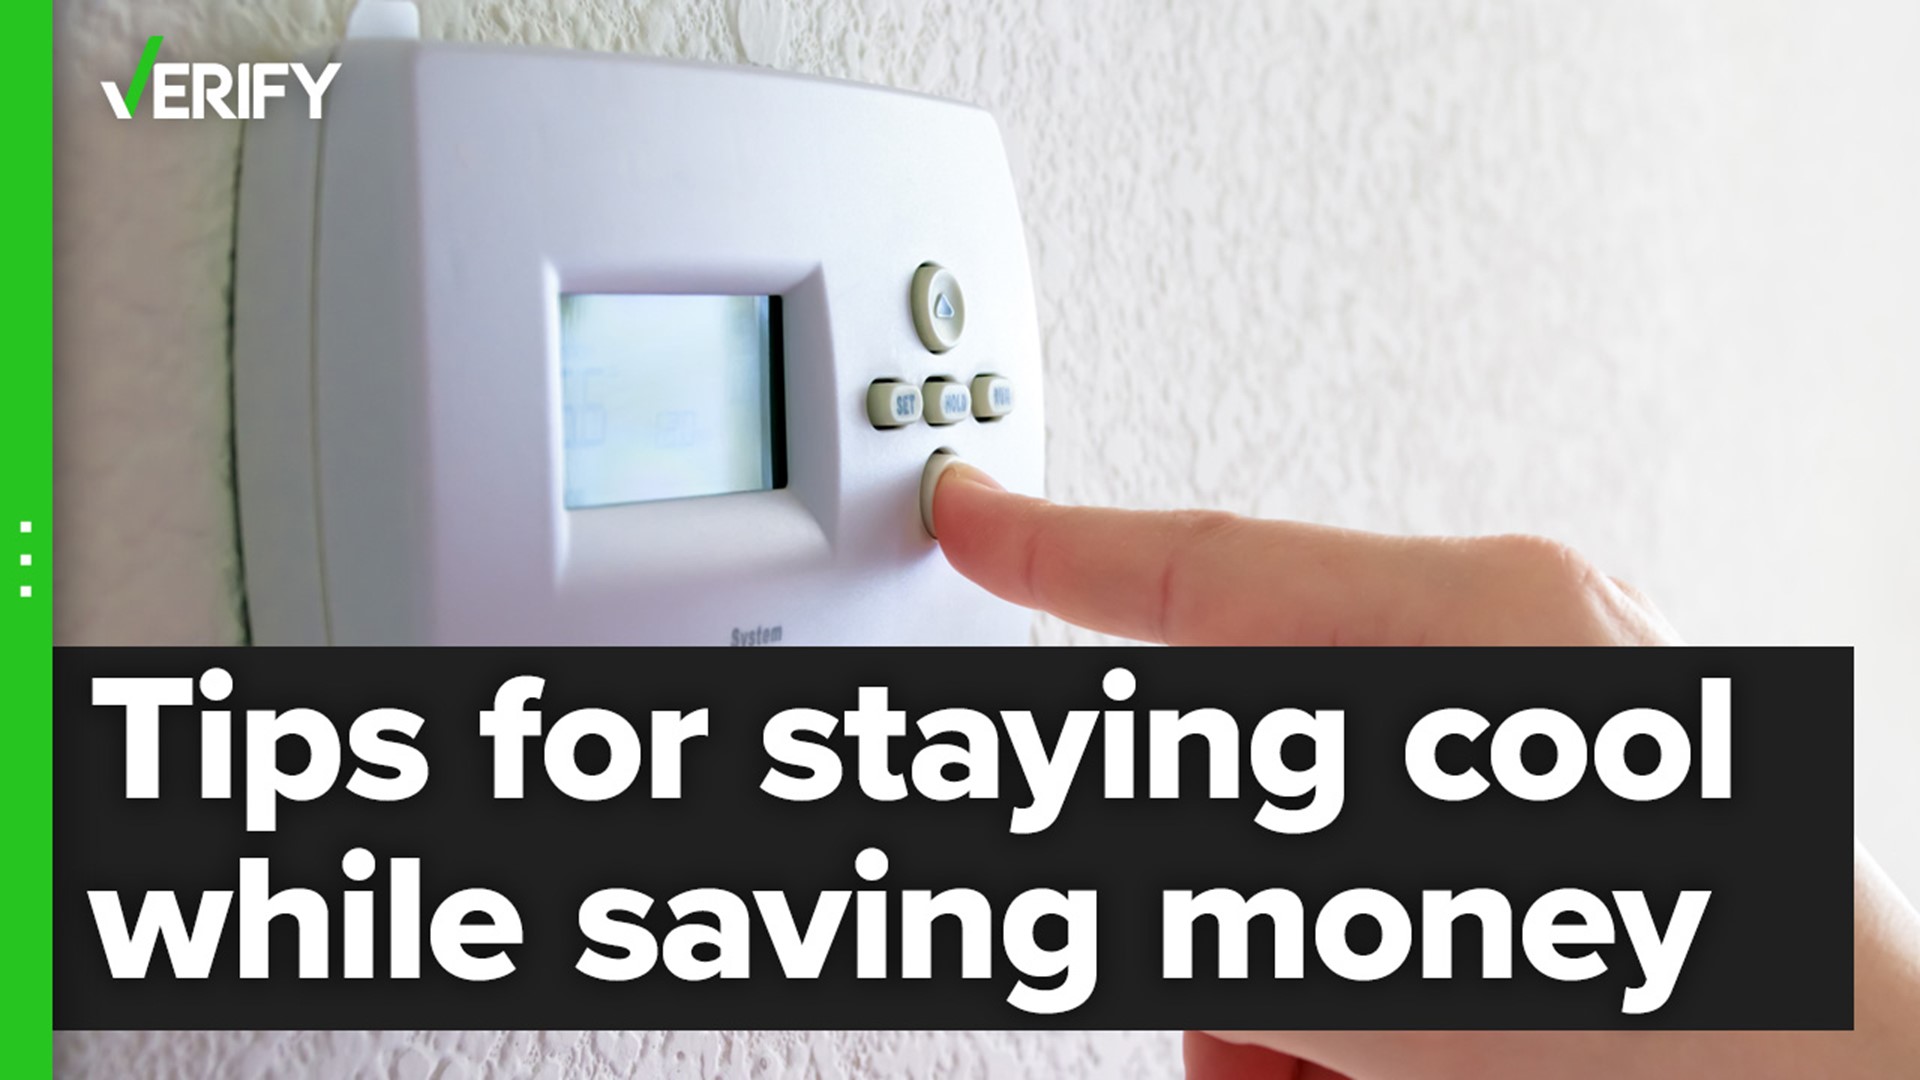 Here are verified ways to help you save energy and beat the heat this summer.